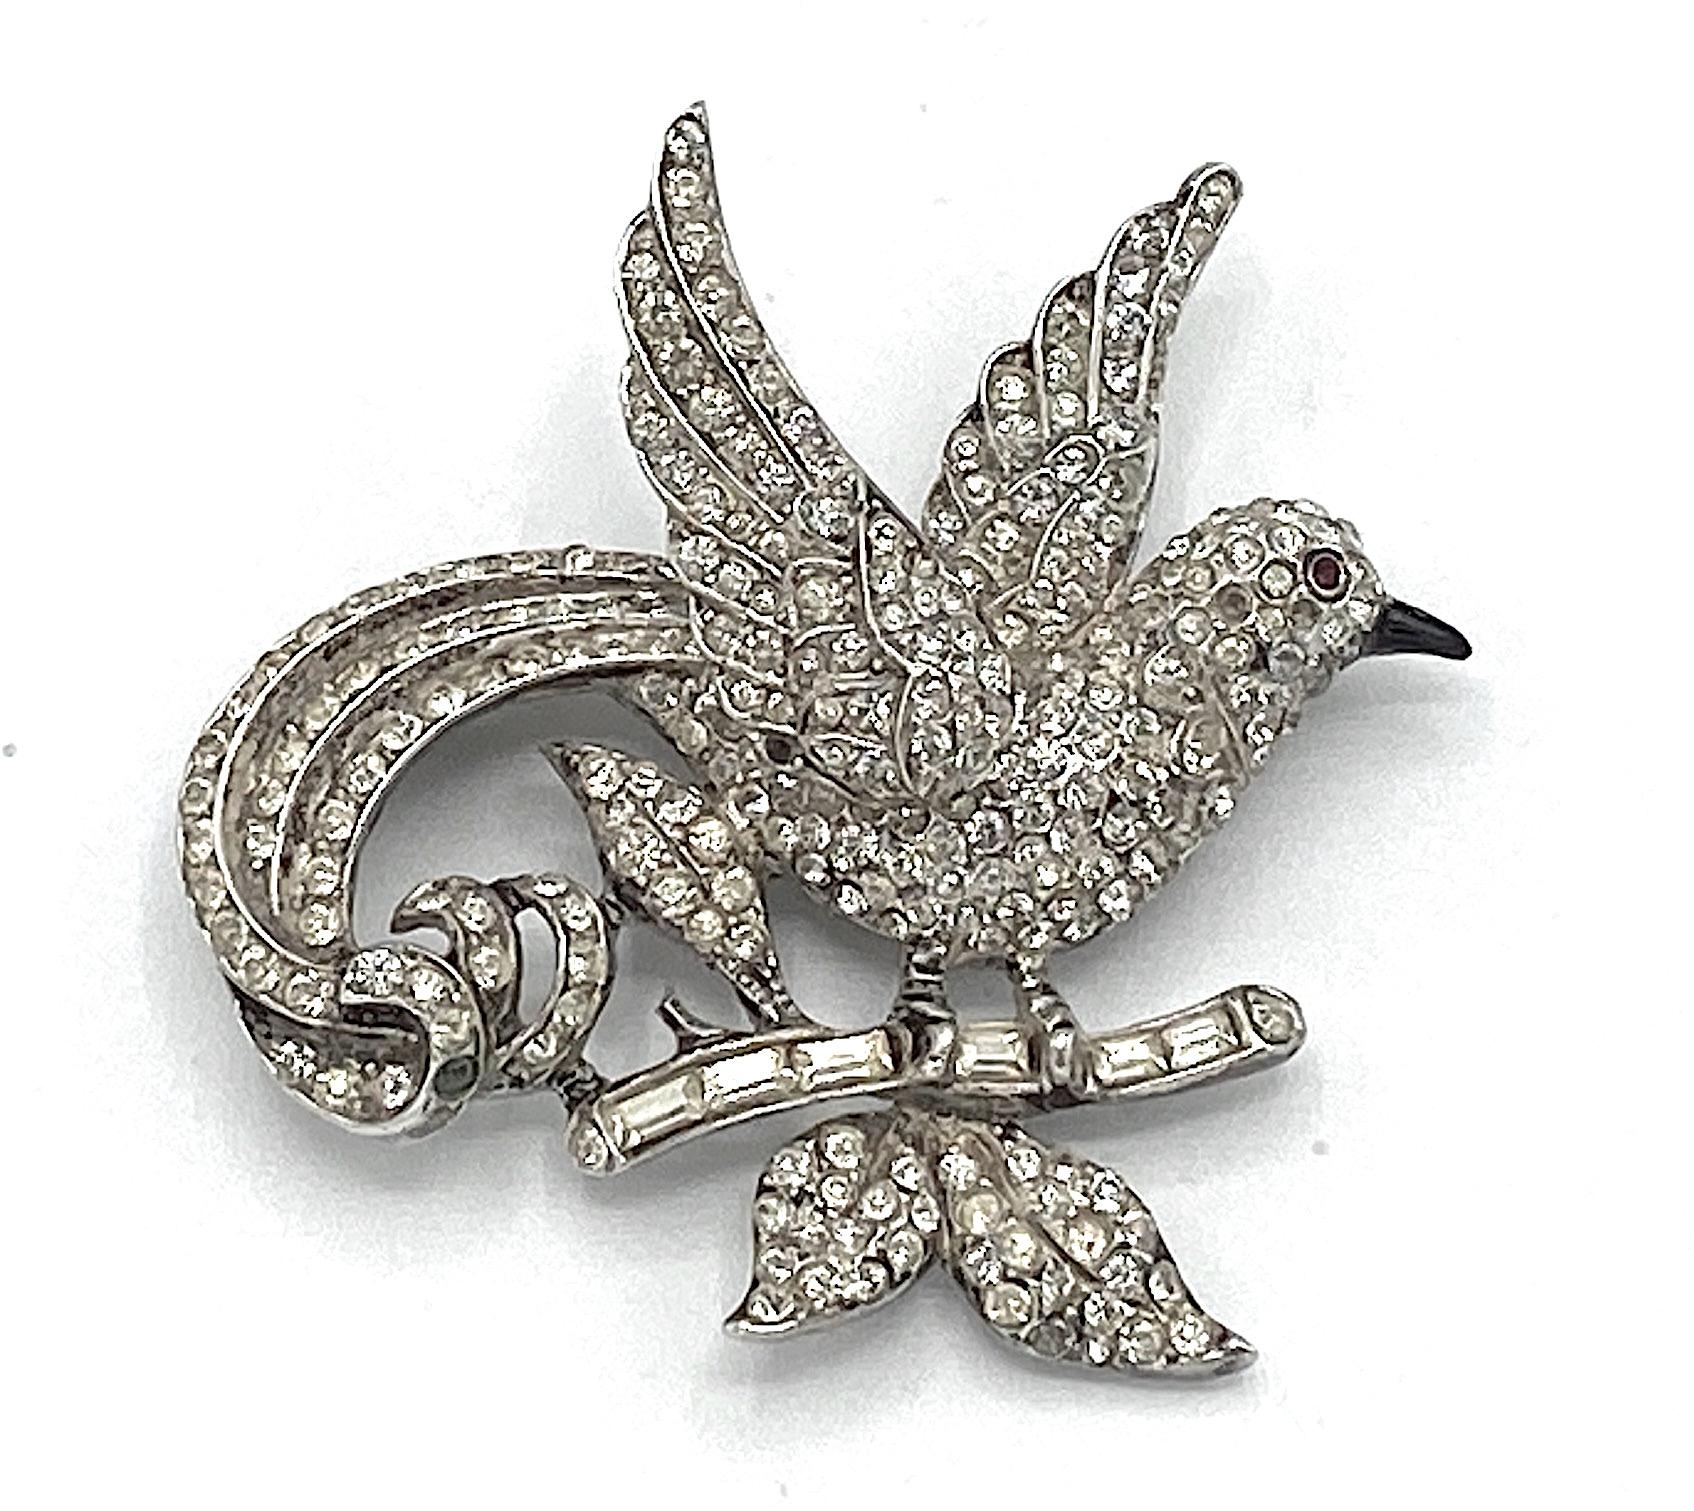 A collectable and charming 1940s brooch of a bird flying with a branch in its claws by famous American fashion jewelry company Coro. Coro was the larges produce of fashion jewelry and operated from 1901 to 1978. The brooch is rhodium plate on